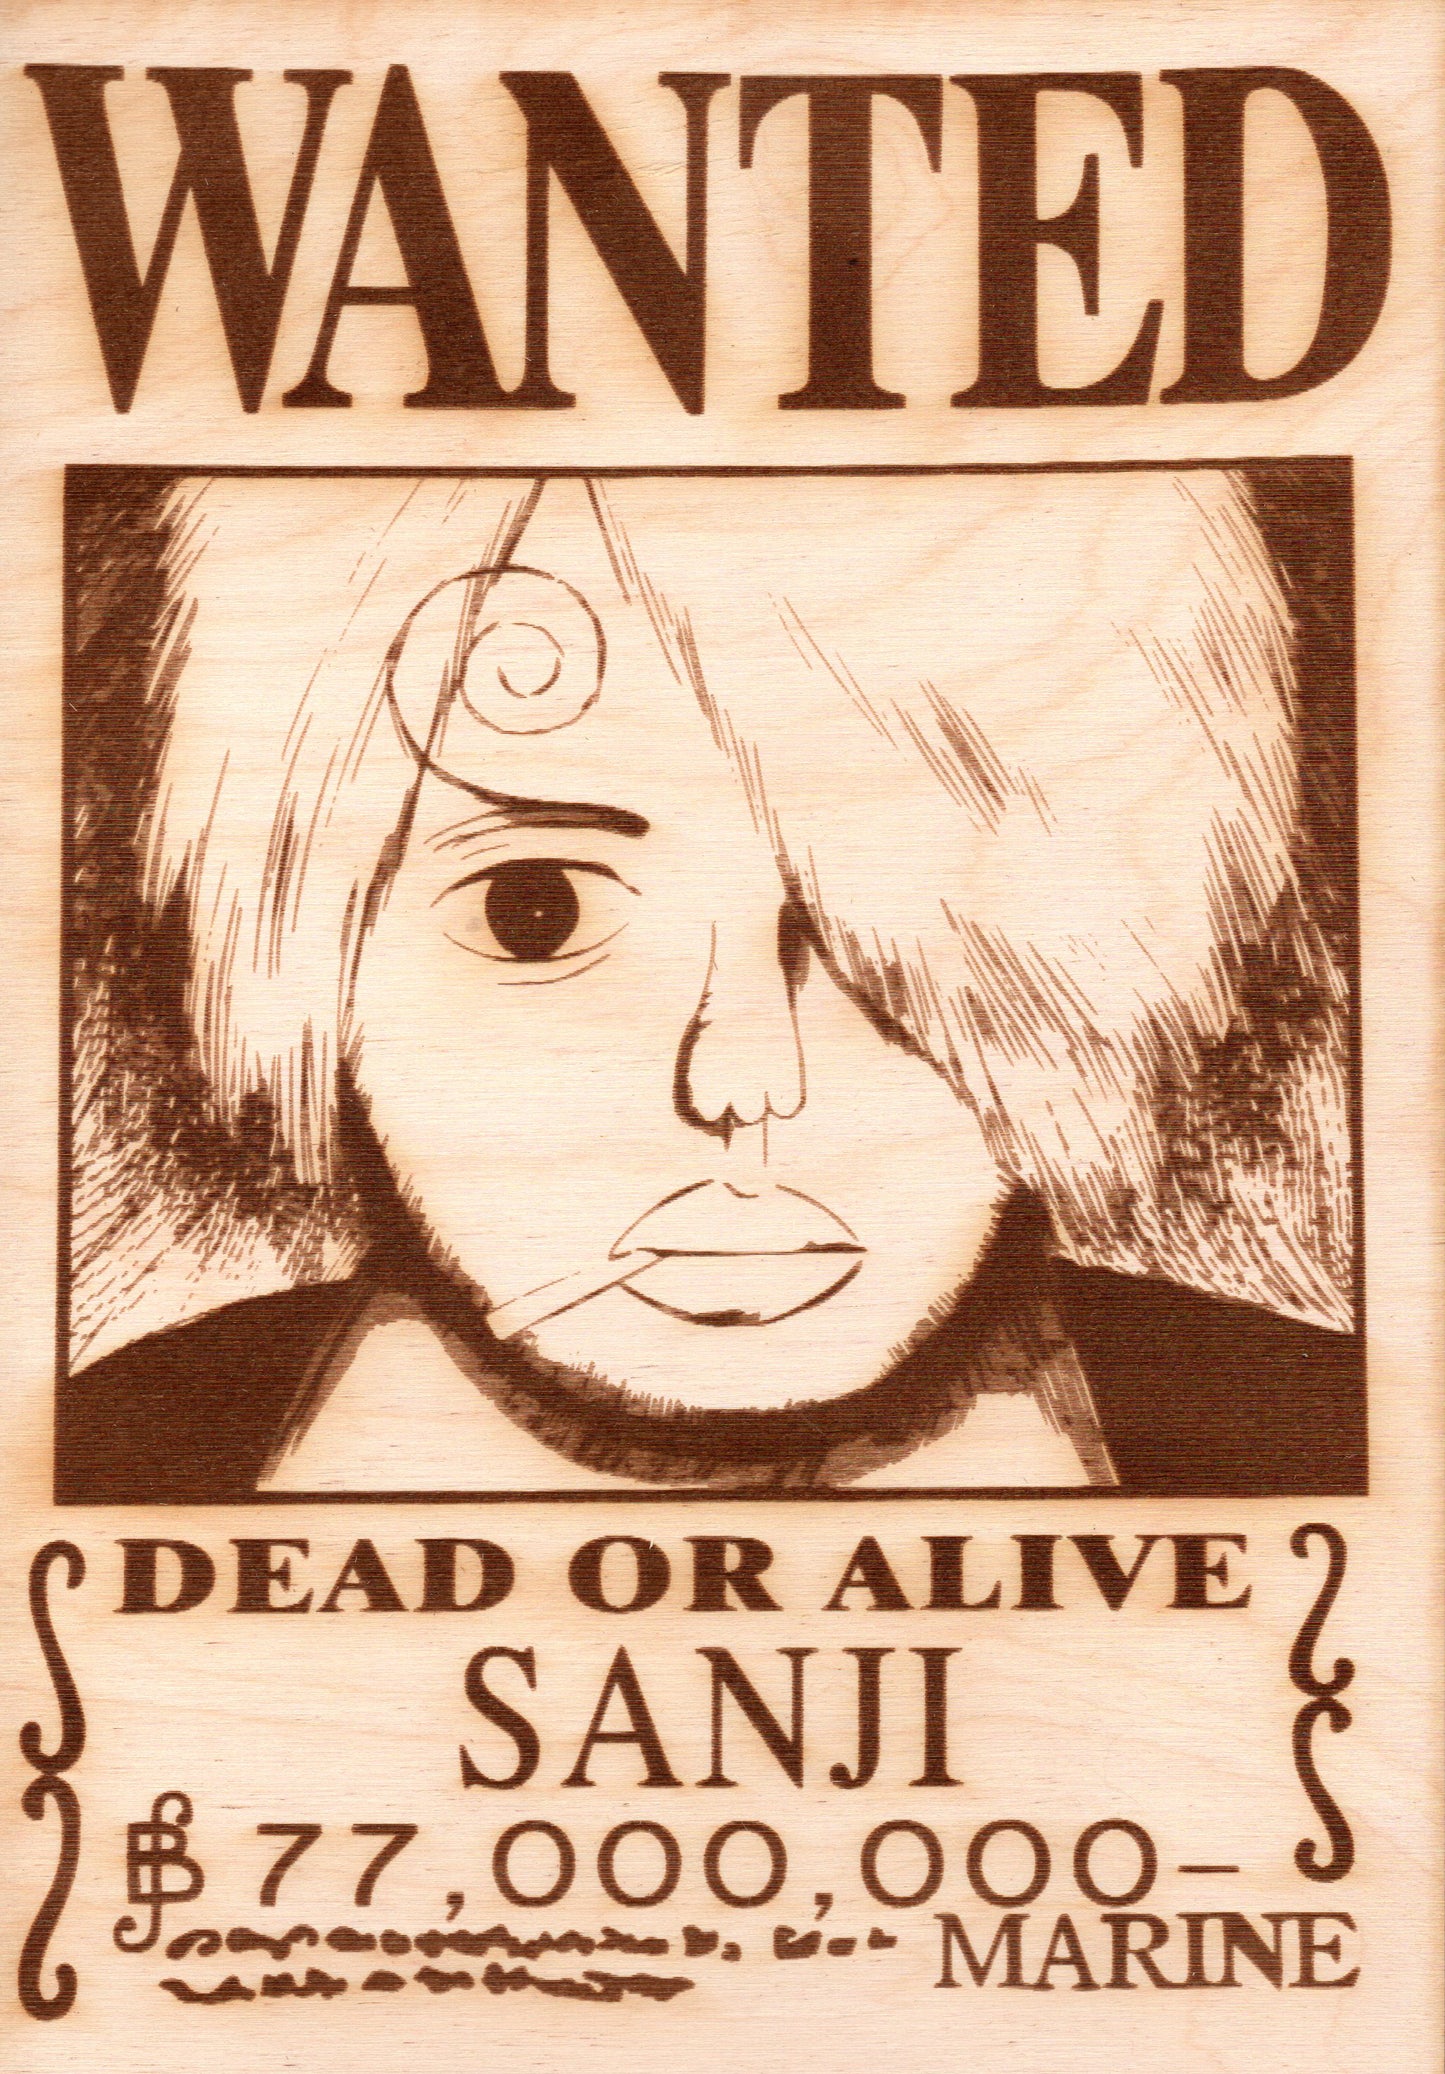 One Piece - Sanji (fake) Wooden Wanted Poster - TantrumCollectibles.com